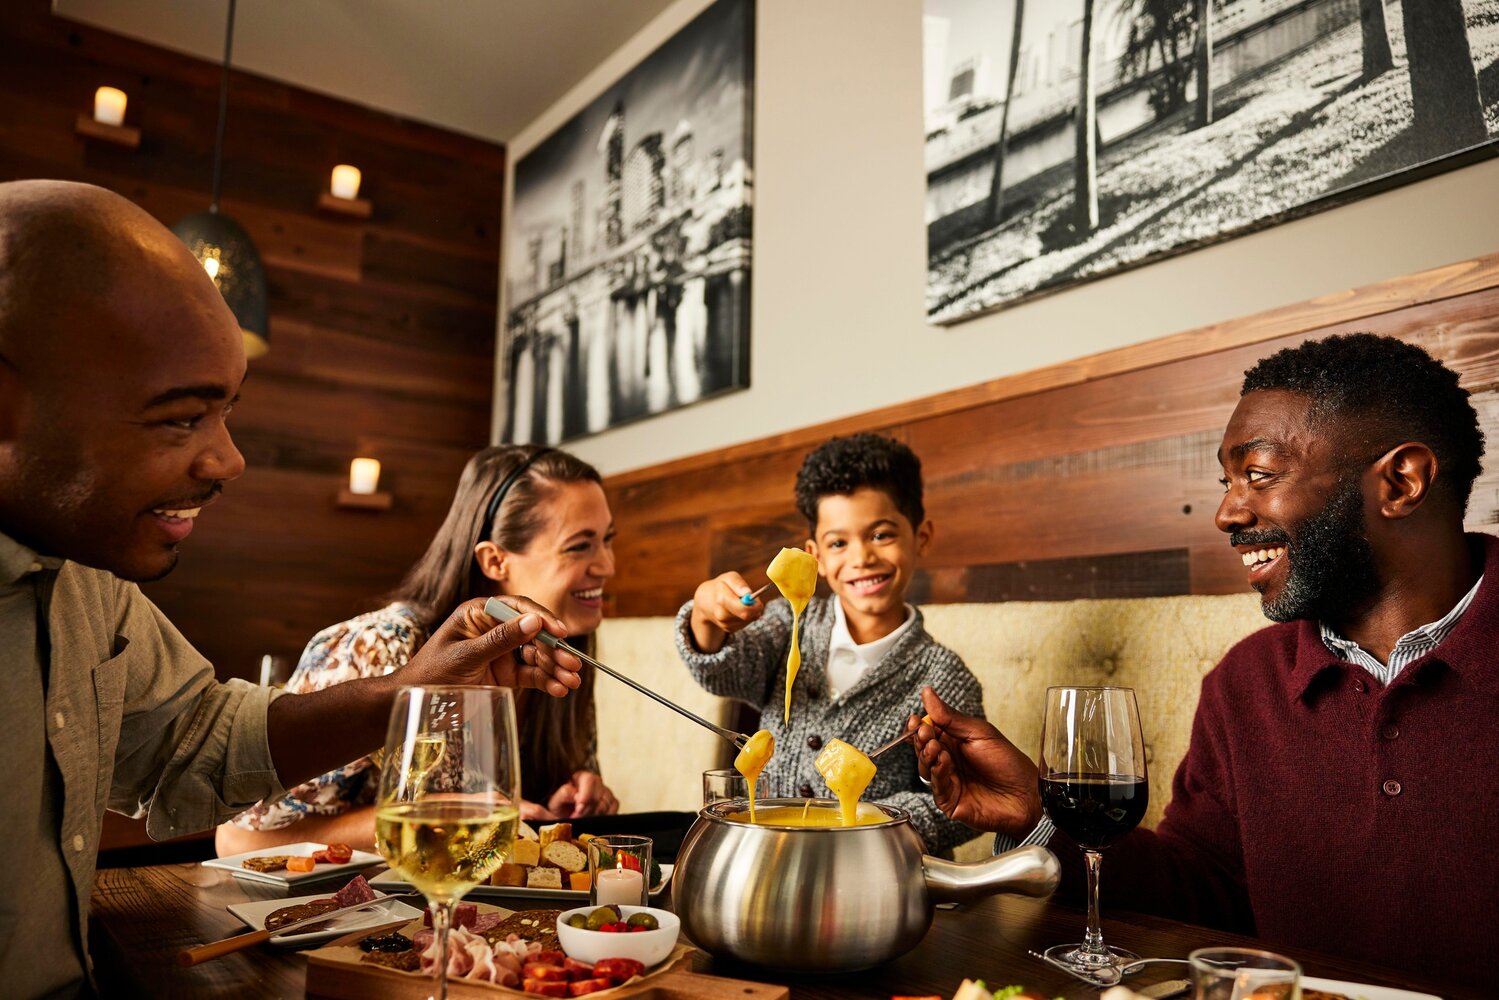 A company promotional photo shows the dining experience at The Melting Pot.